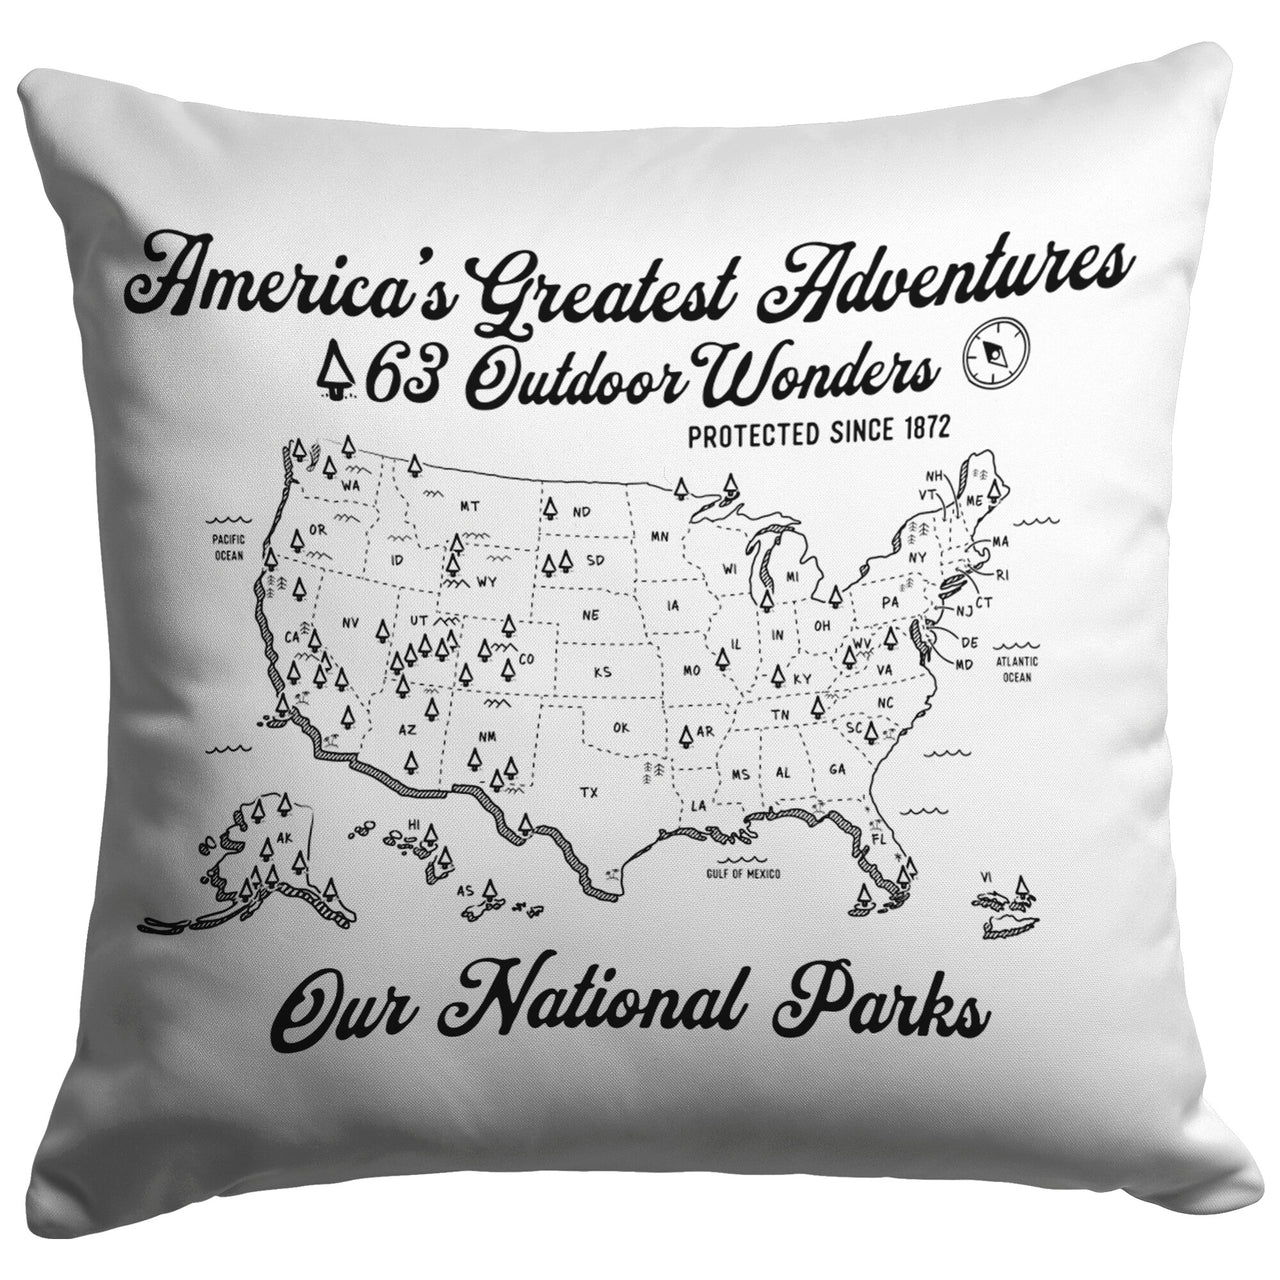 National Parks - America's Greatest Adventures (White)